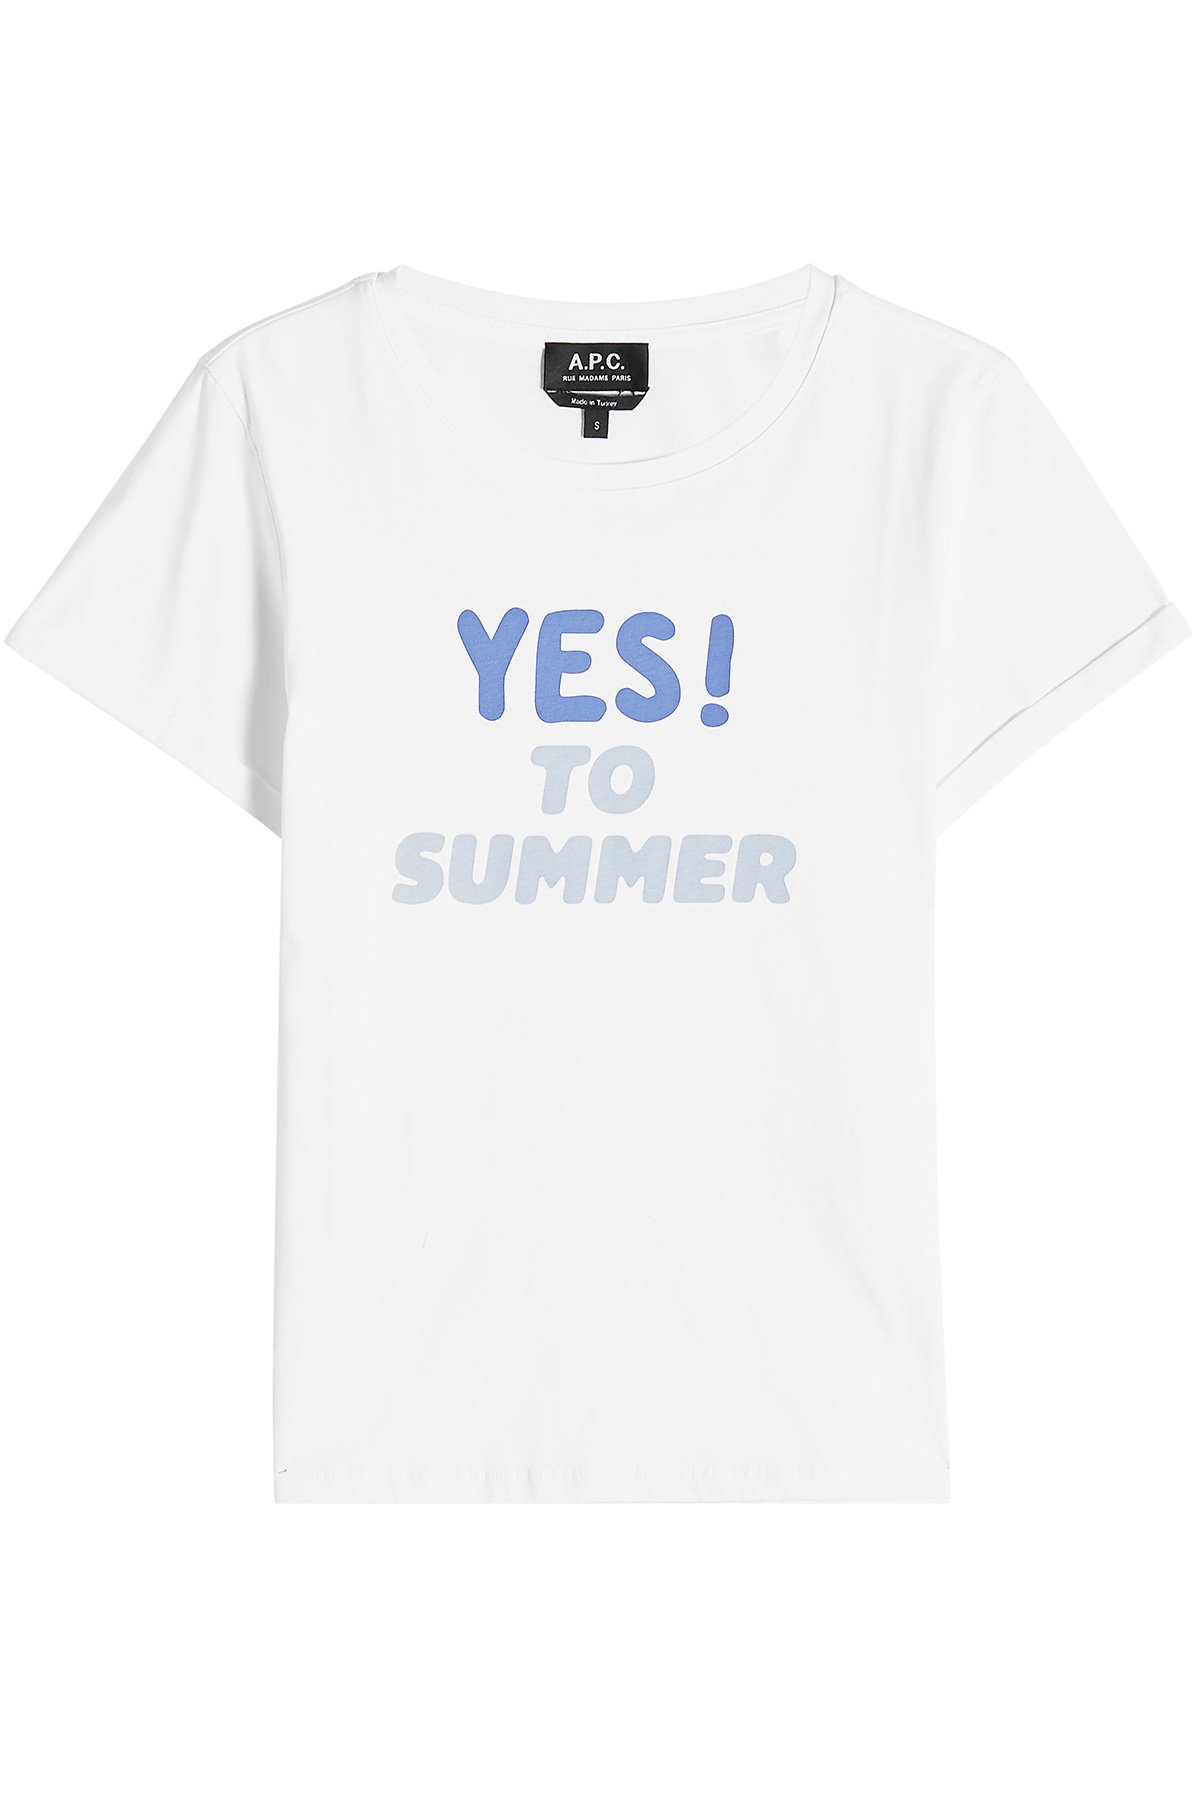 A.P.C. - Yes! To Summer Cotton T-Shirt